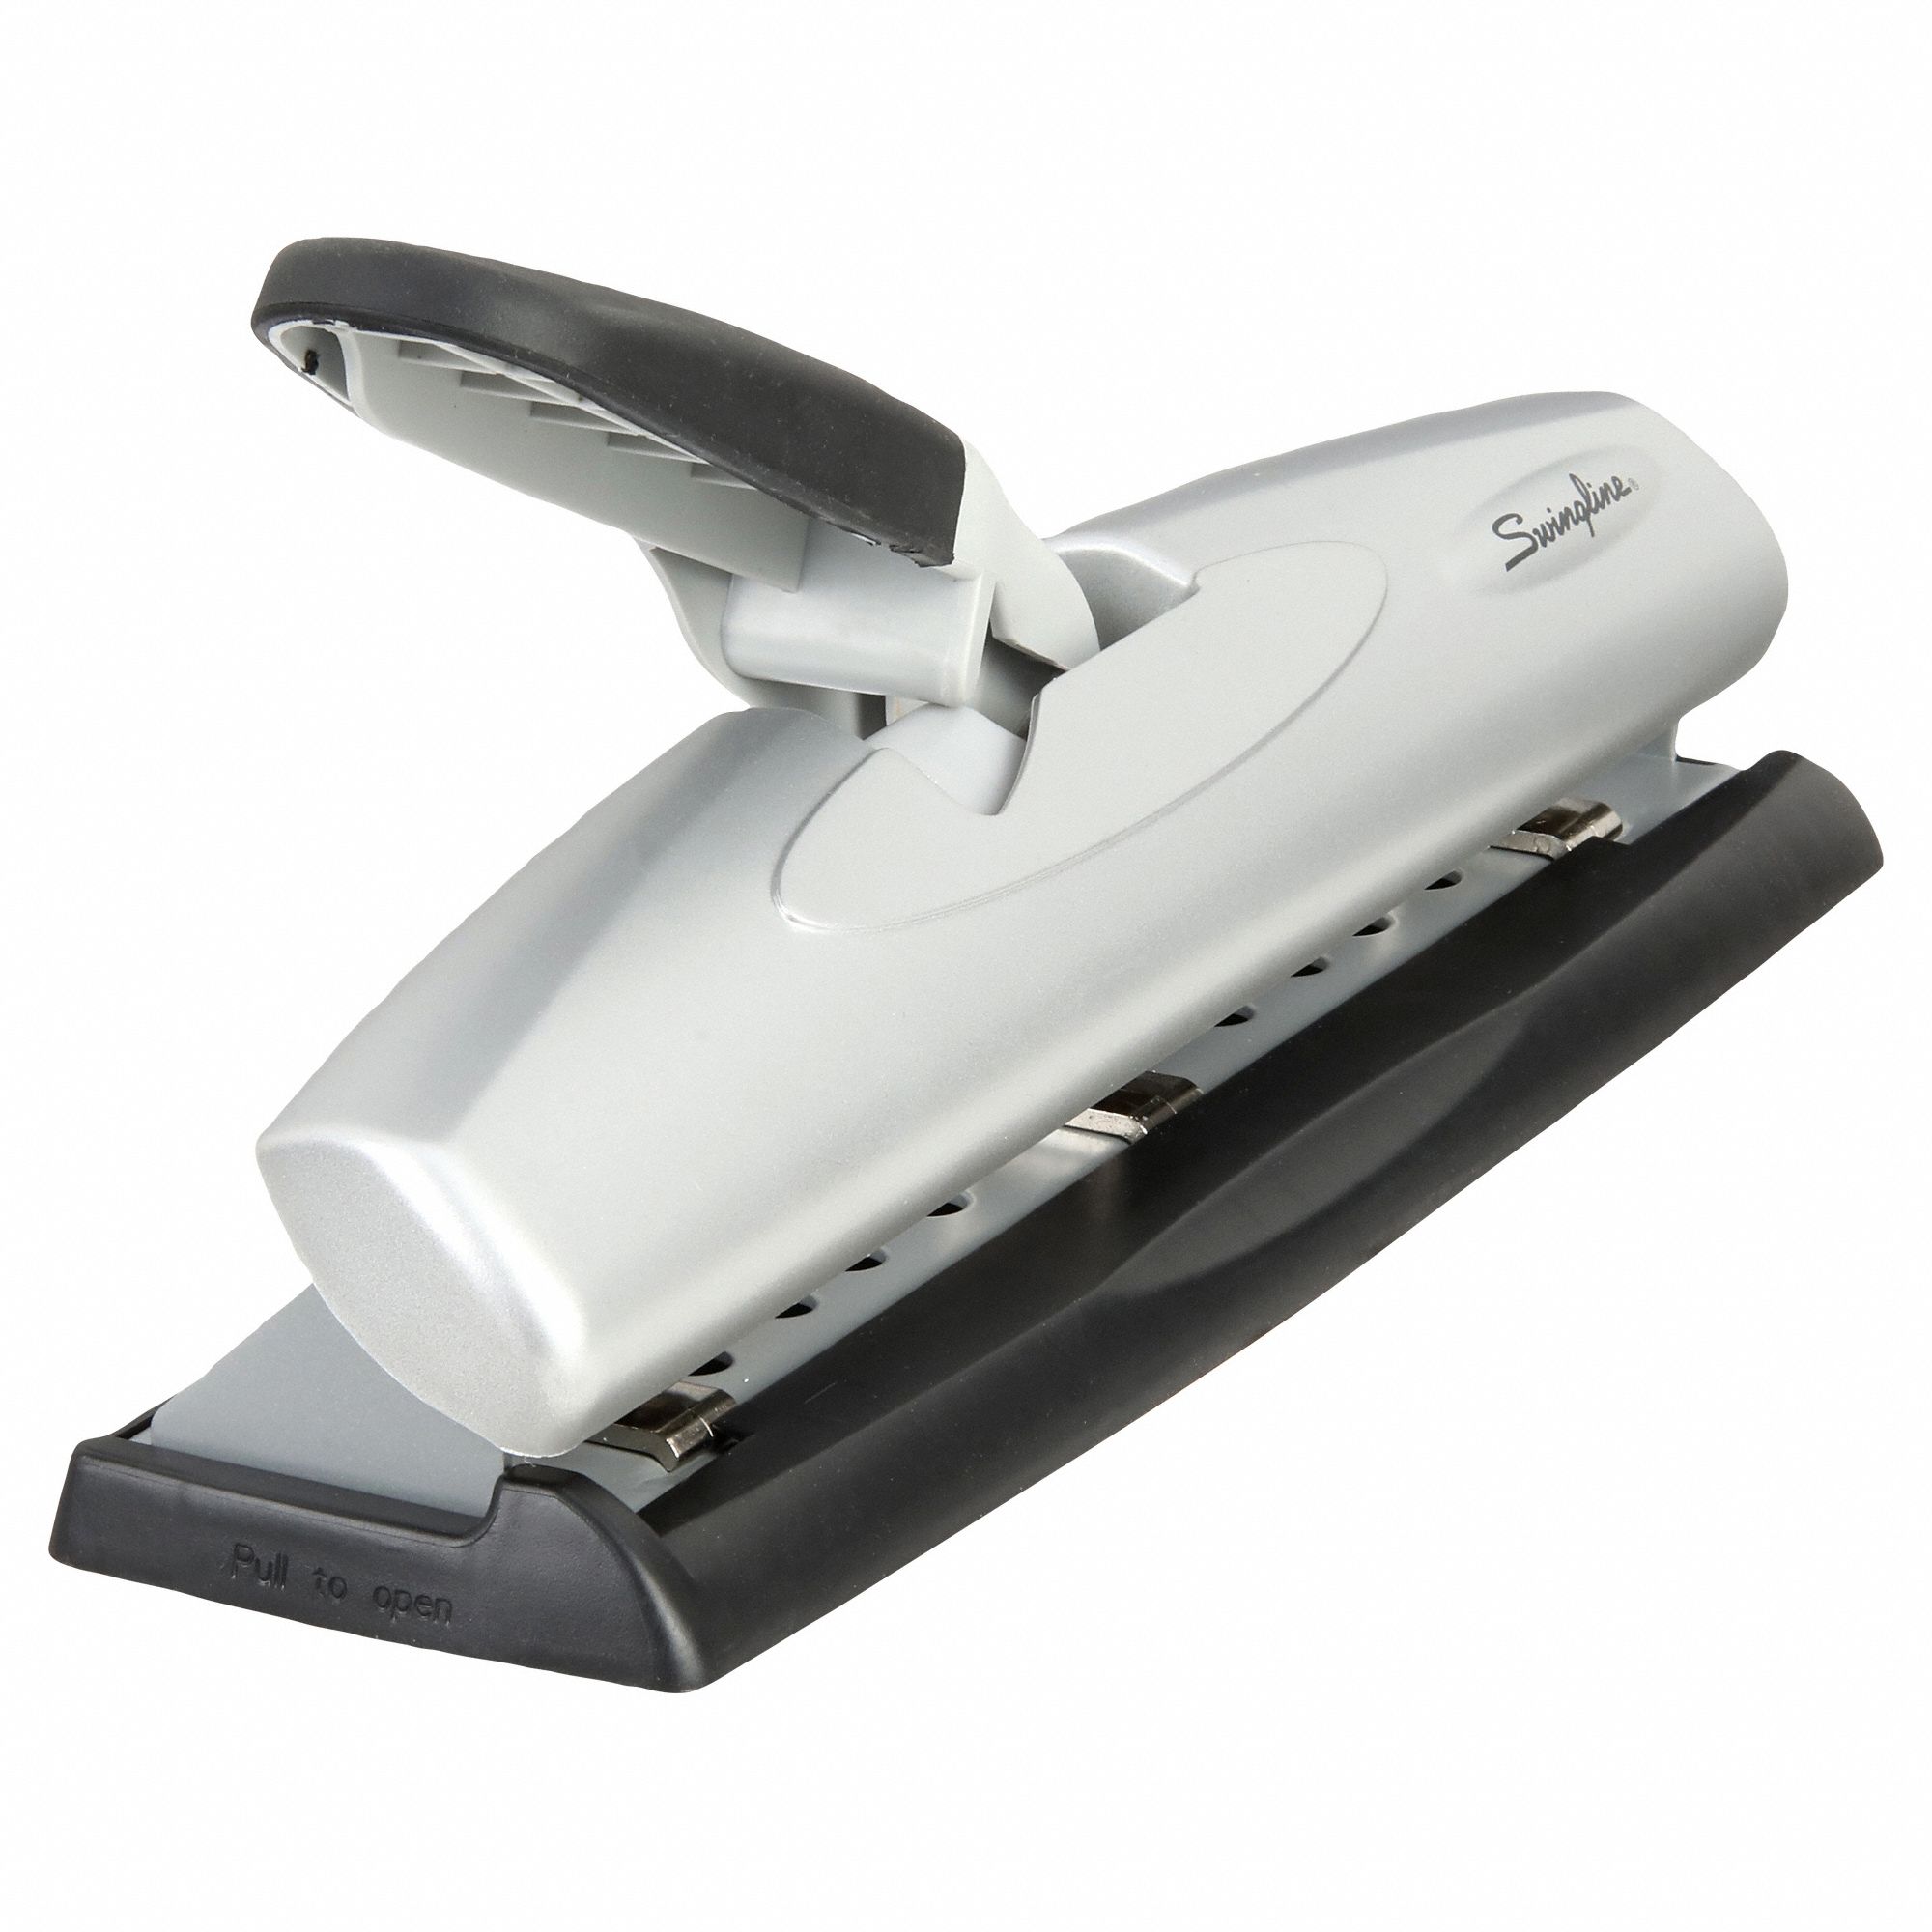 3 Hole Punch Heavy Duty Portable 12 Sheet Paper Capacity Paper